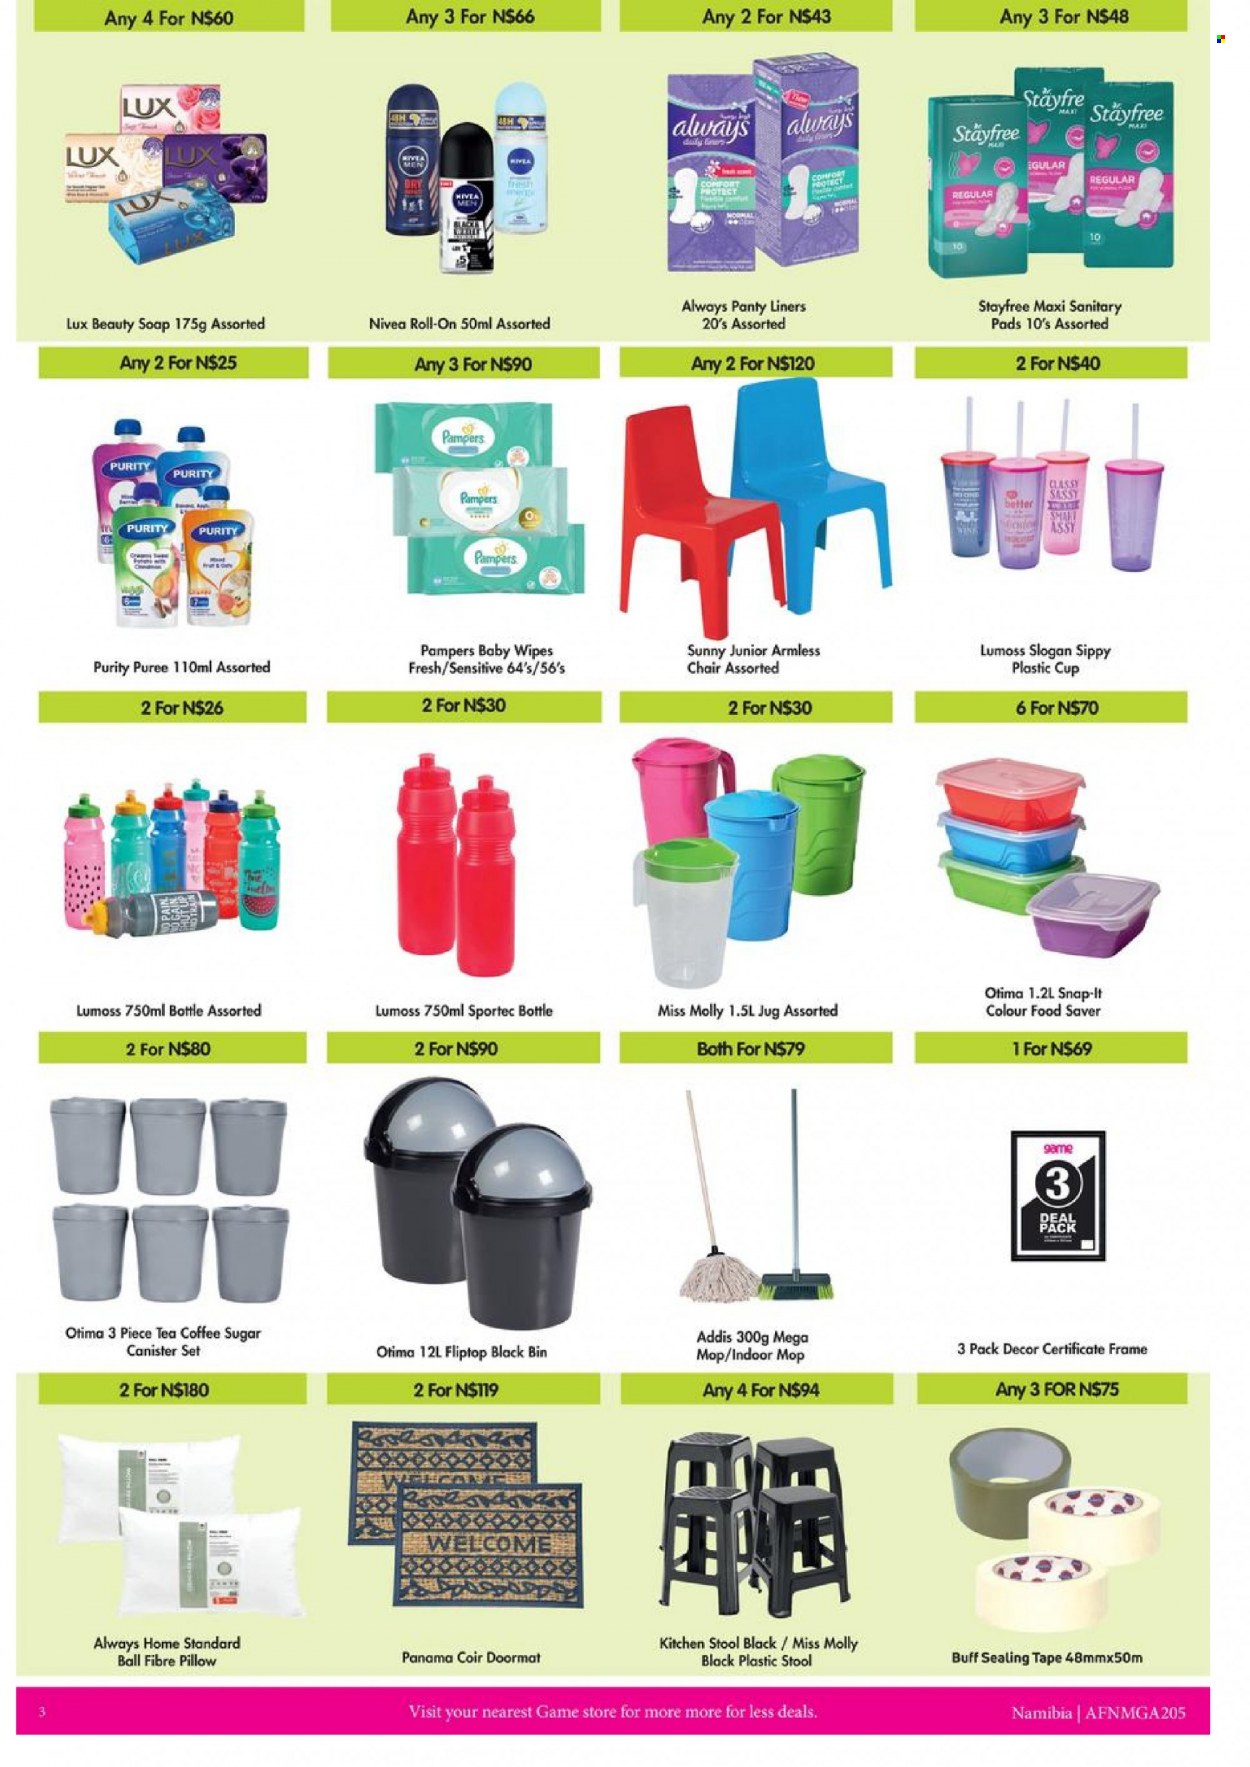 thumbnail - Game catalogue  - 01/10/2022 - 31/12/2022 - Sales products - sugar, tea, coffee, Purity, wipes, Pampers, baby wipes, Always liners, Lux, Nivea, soap, Stayfree, sanitary pads, roll-on, canister, cup, pillow. Page 3.